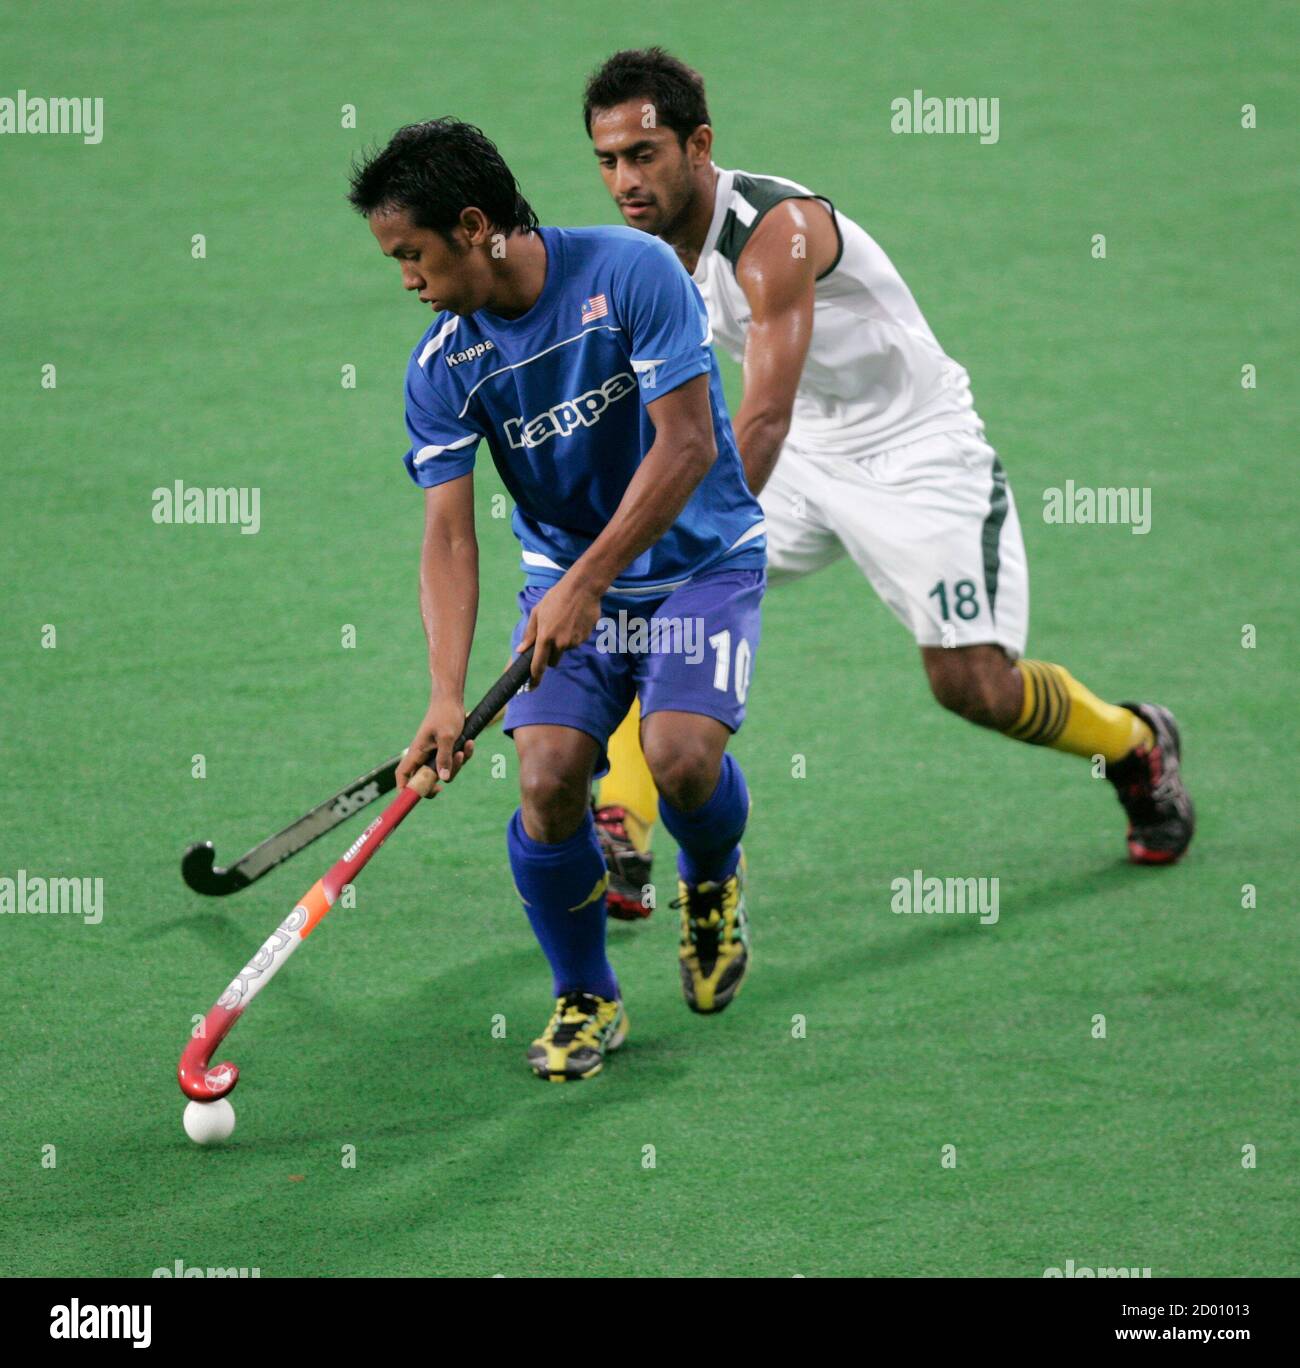 Saari Faizal of Malaysia (L) fights for the ball with Mehmood Rashid of  Pakistan during their match at the Sultan Azlan Shah Cup hockey tournament  in Ipoh May 14, 2011. REUTERS/Samsul Said (